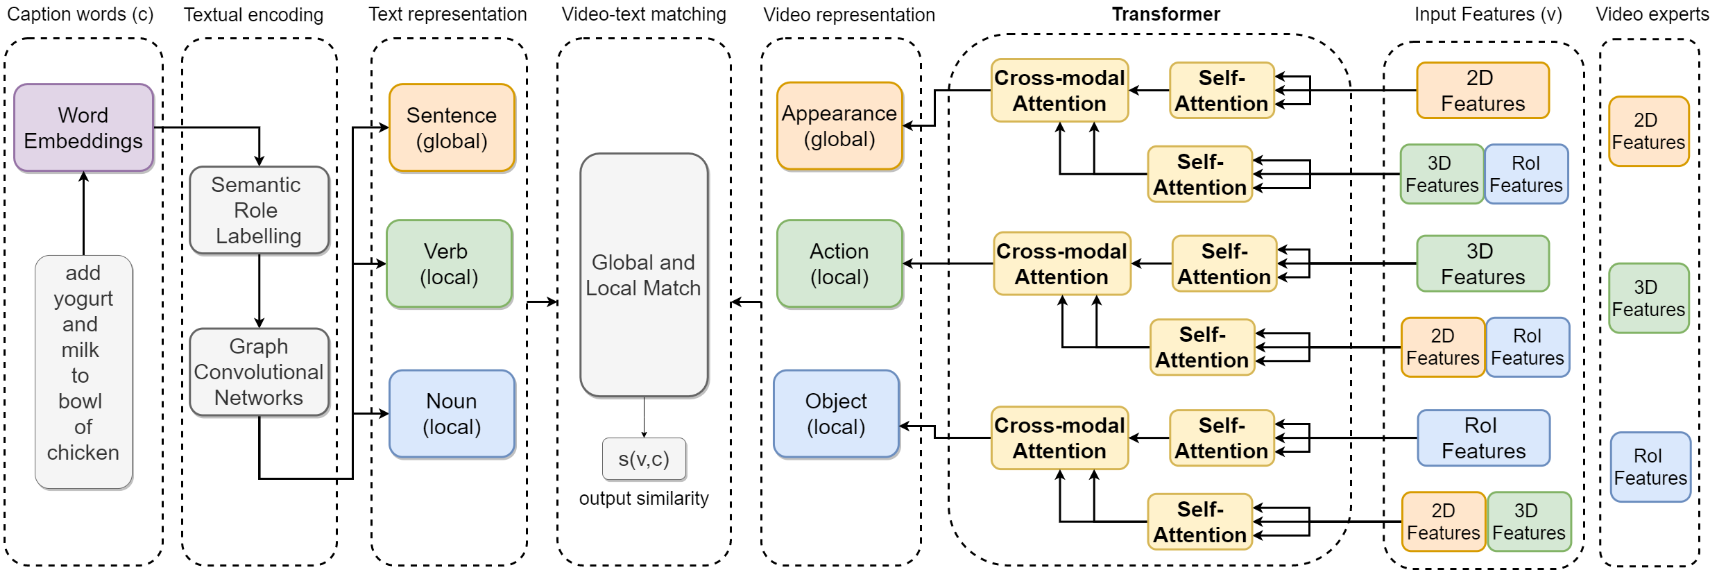 Overview of our model on text-to-video retrieval